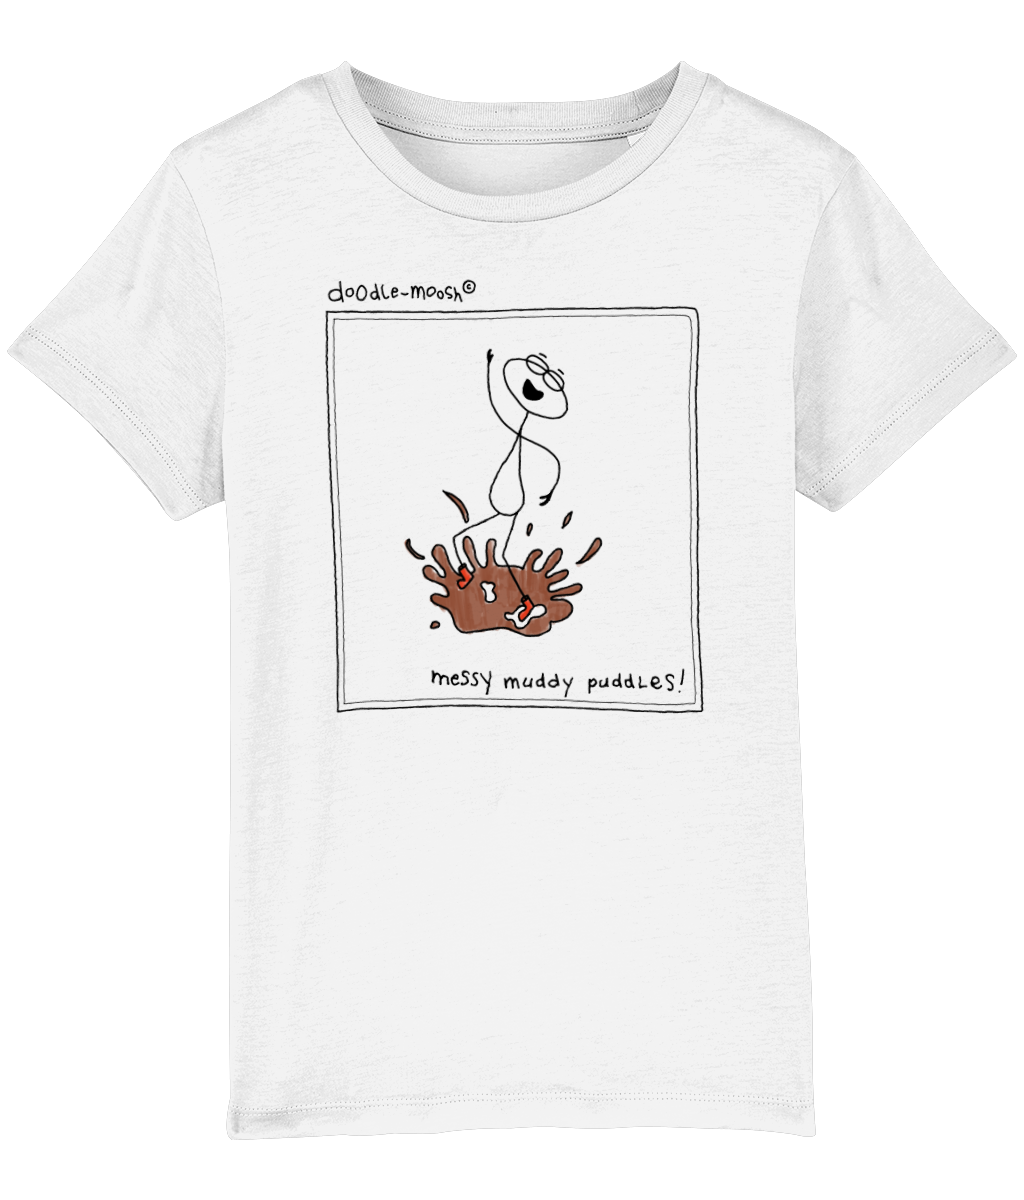 Messy muddy puddles t-shirt, white with black, colourful drawings